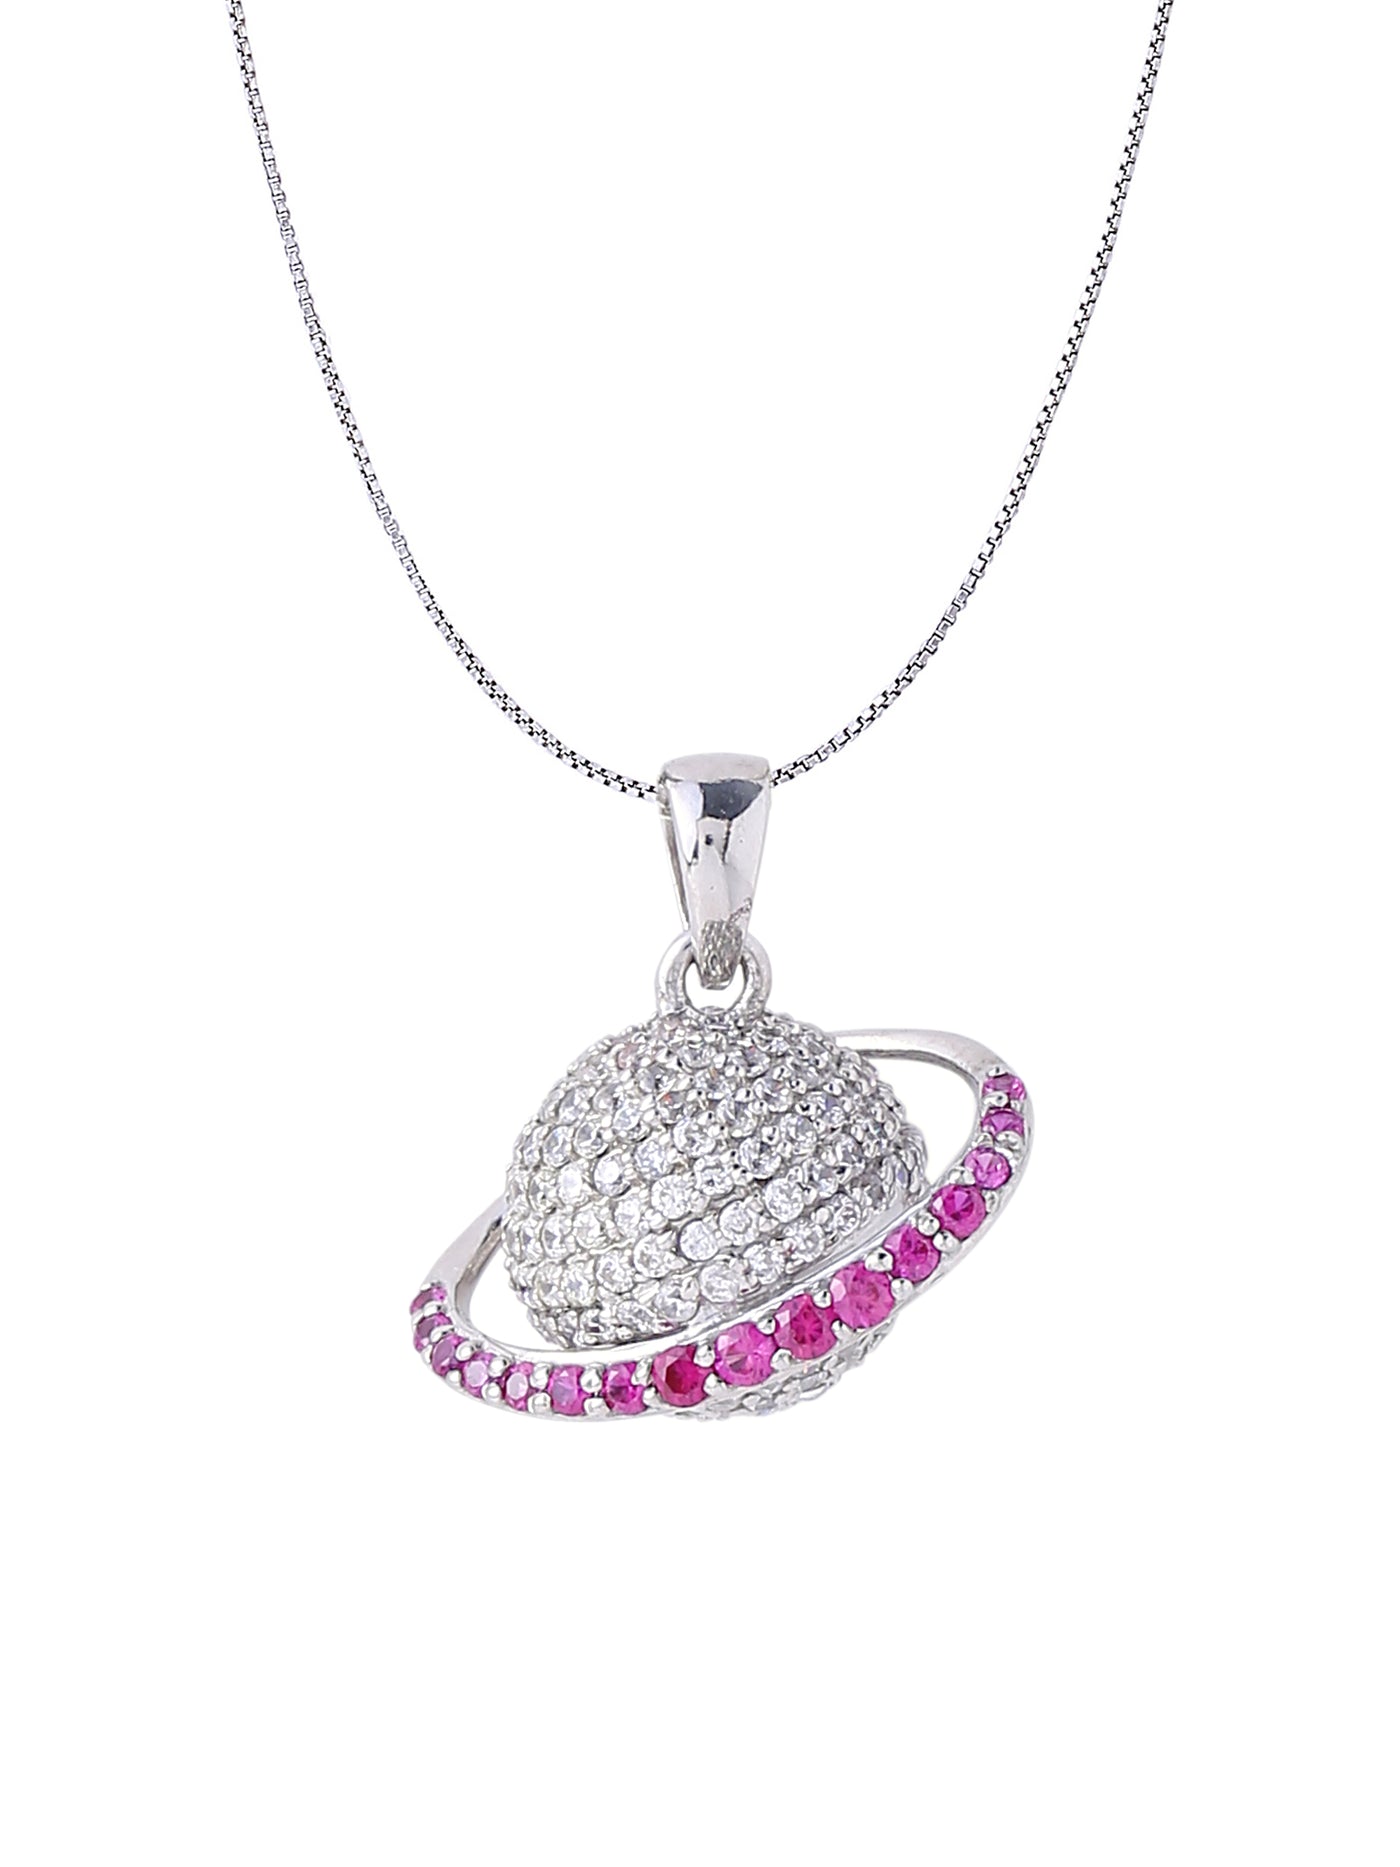 White Gold Color Saturn Pendant Made of 925 Sterling Silver Material with 20 Inch Long Silver Chain